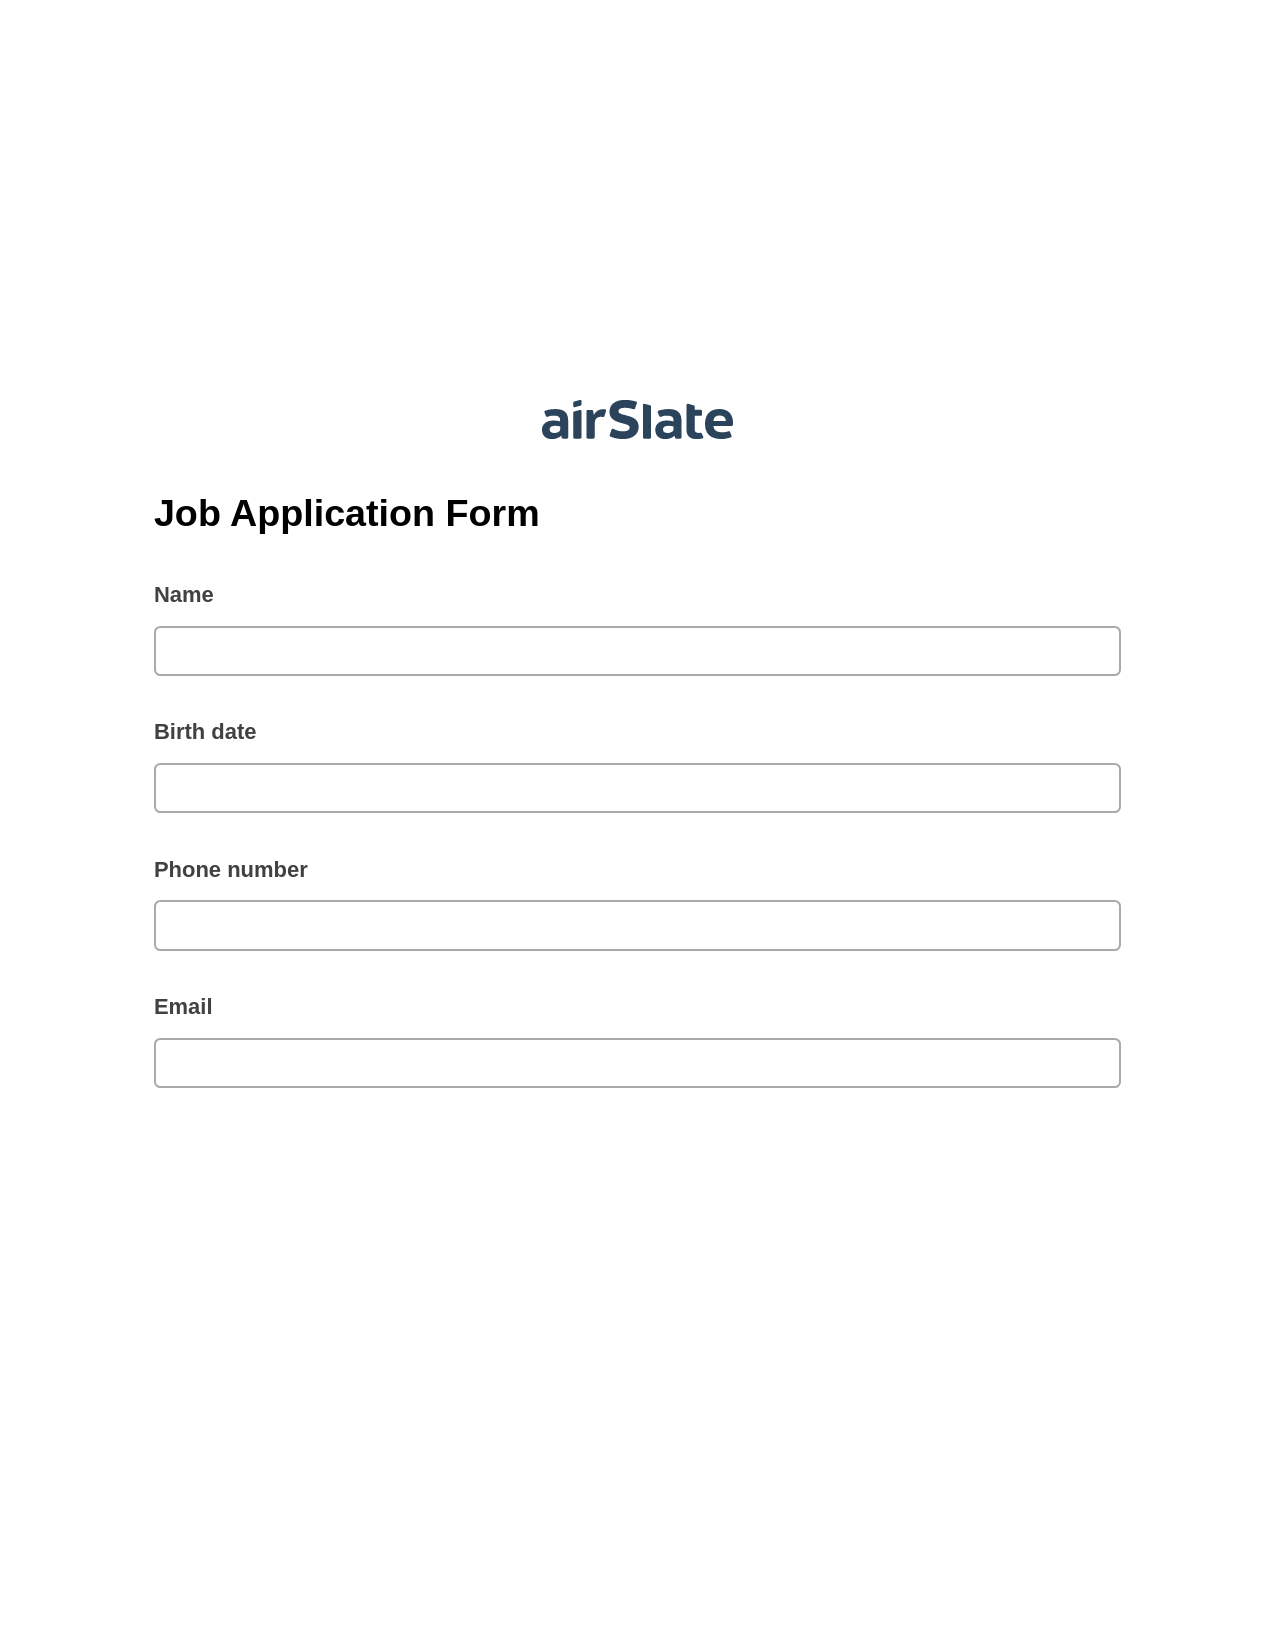 Job Application Form Pre-fill from NetSuite Records Bot, Invoke Salesforce Process Bot, Export to Formstack Documents Bot